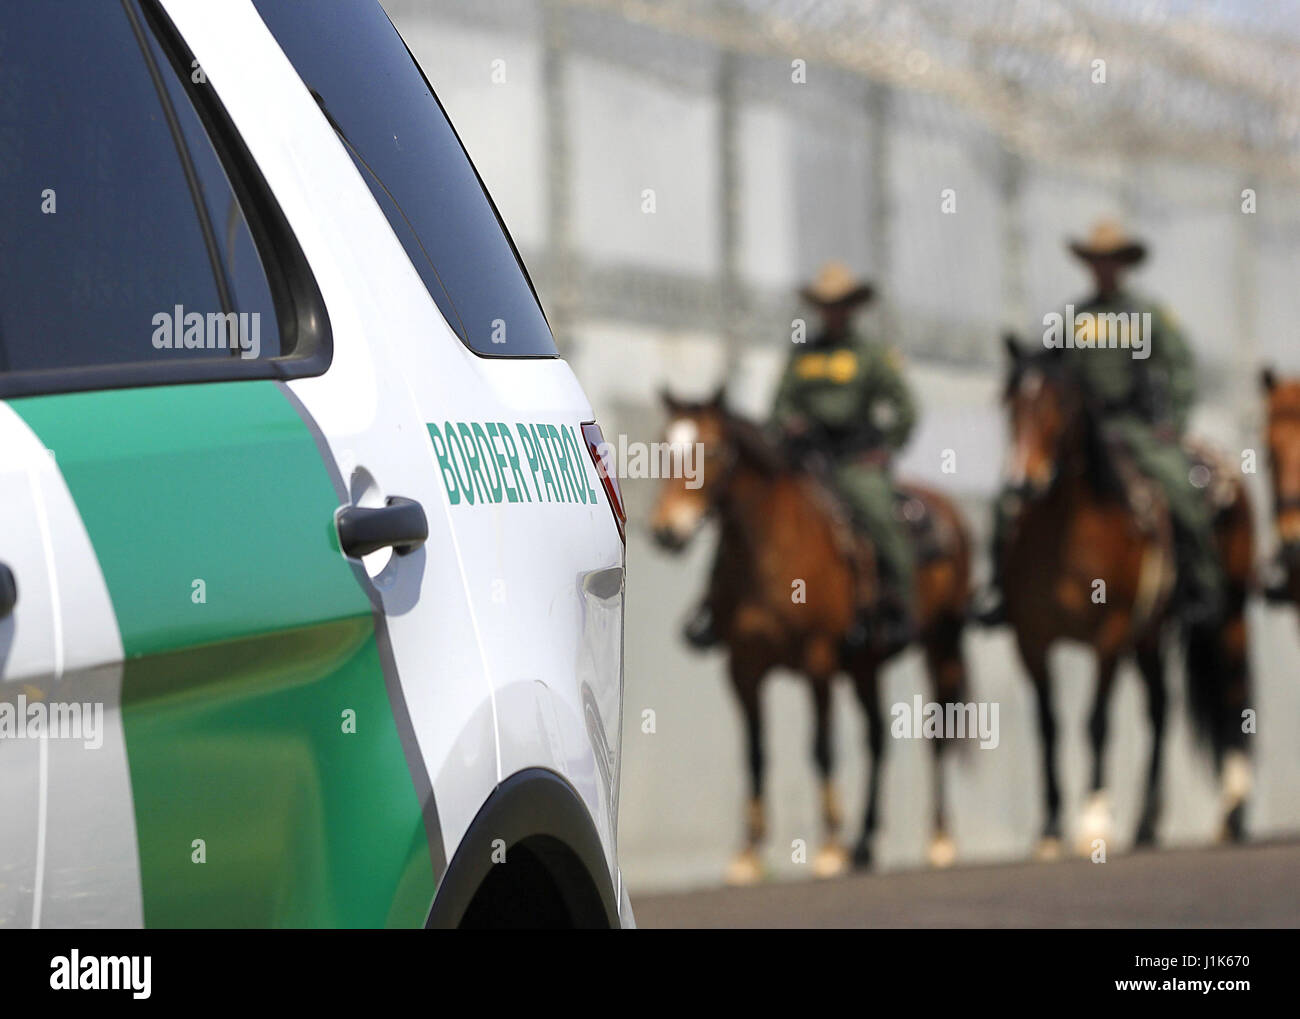 San Ysidro, CA, USA. 21st Apr, 2017. The San Diego Sector Customs and Border Protection horse patrol rode along the border with Mexico before a press conference featuring attorney general Jeff Sessions and Homeland Security Secretary John Kelly. Credit: John Gastaldo/ZUMA Wire/Alamy Live News Stock Photo